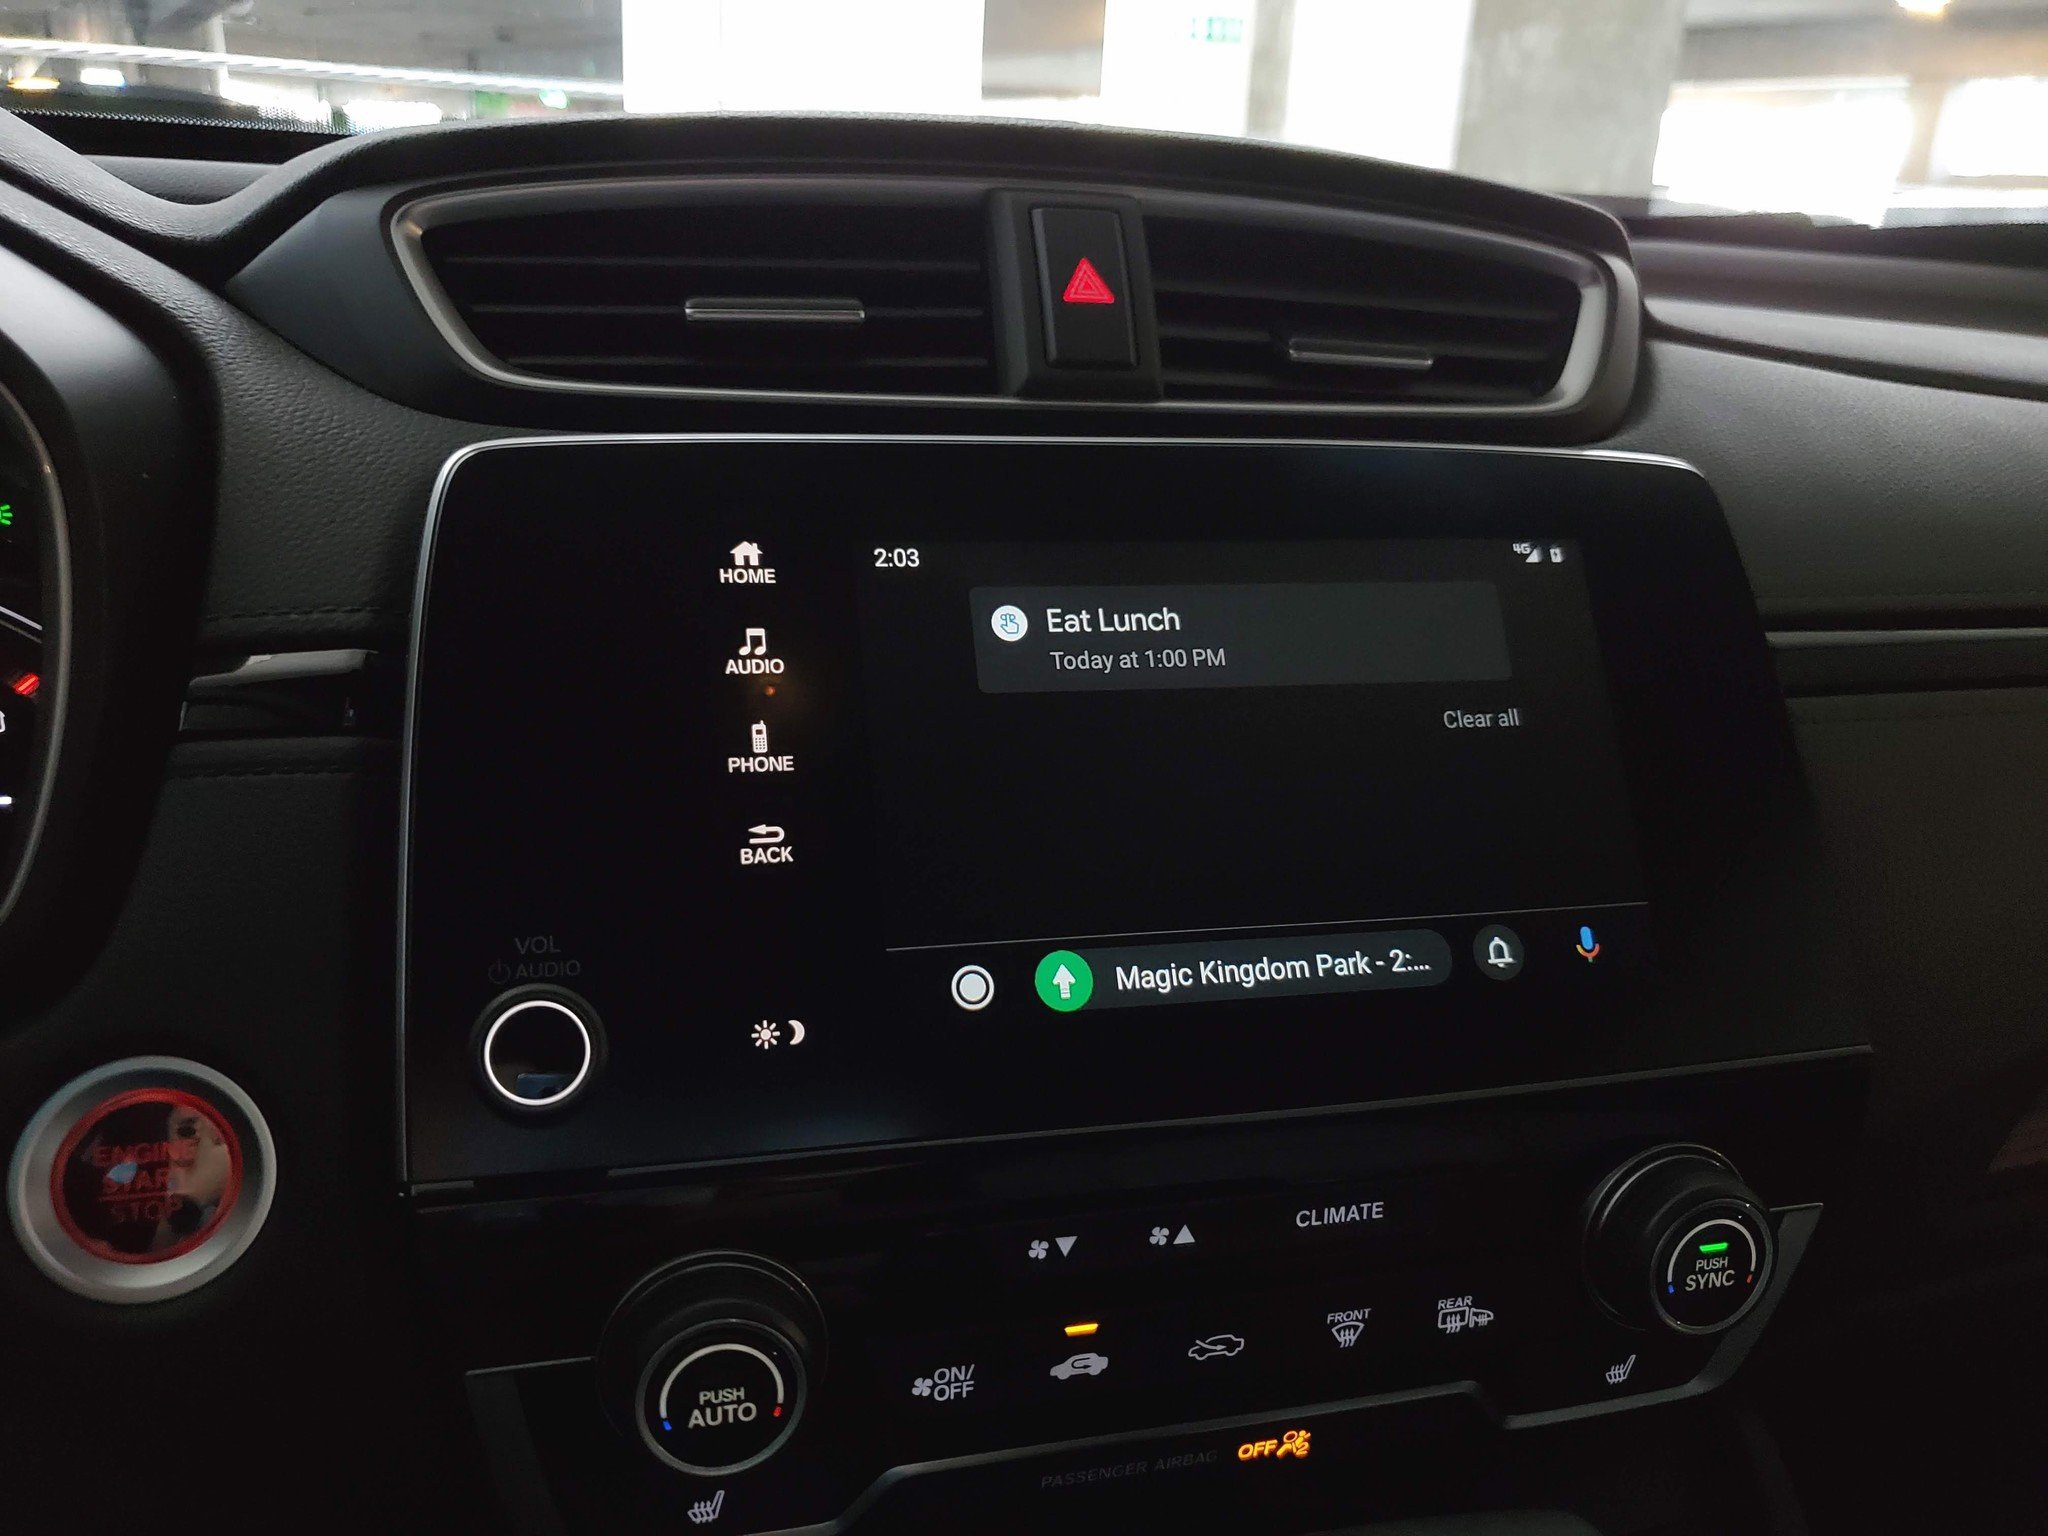 new Android Auto notifications